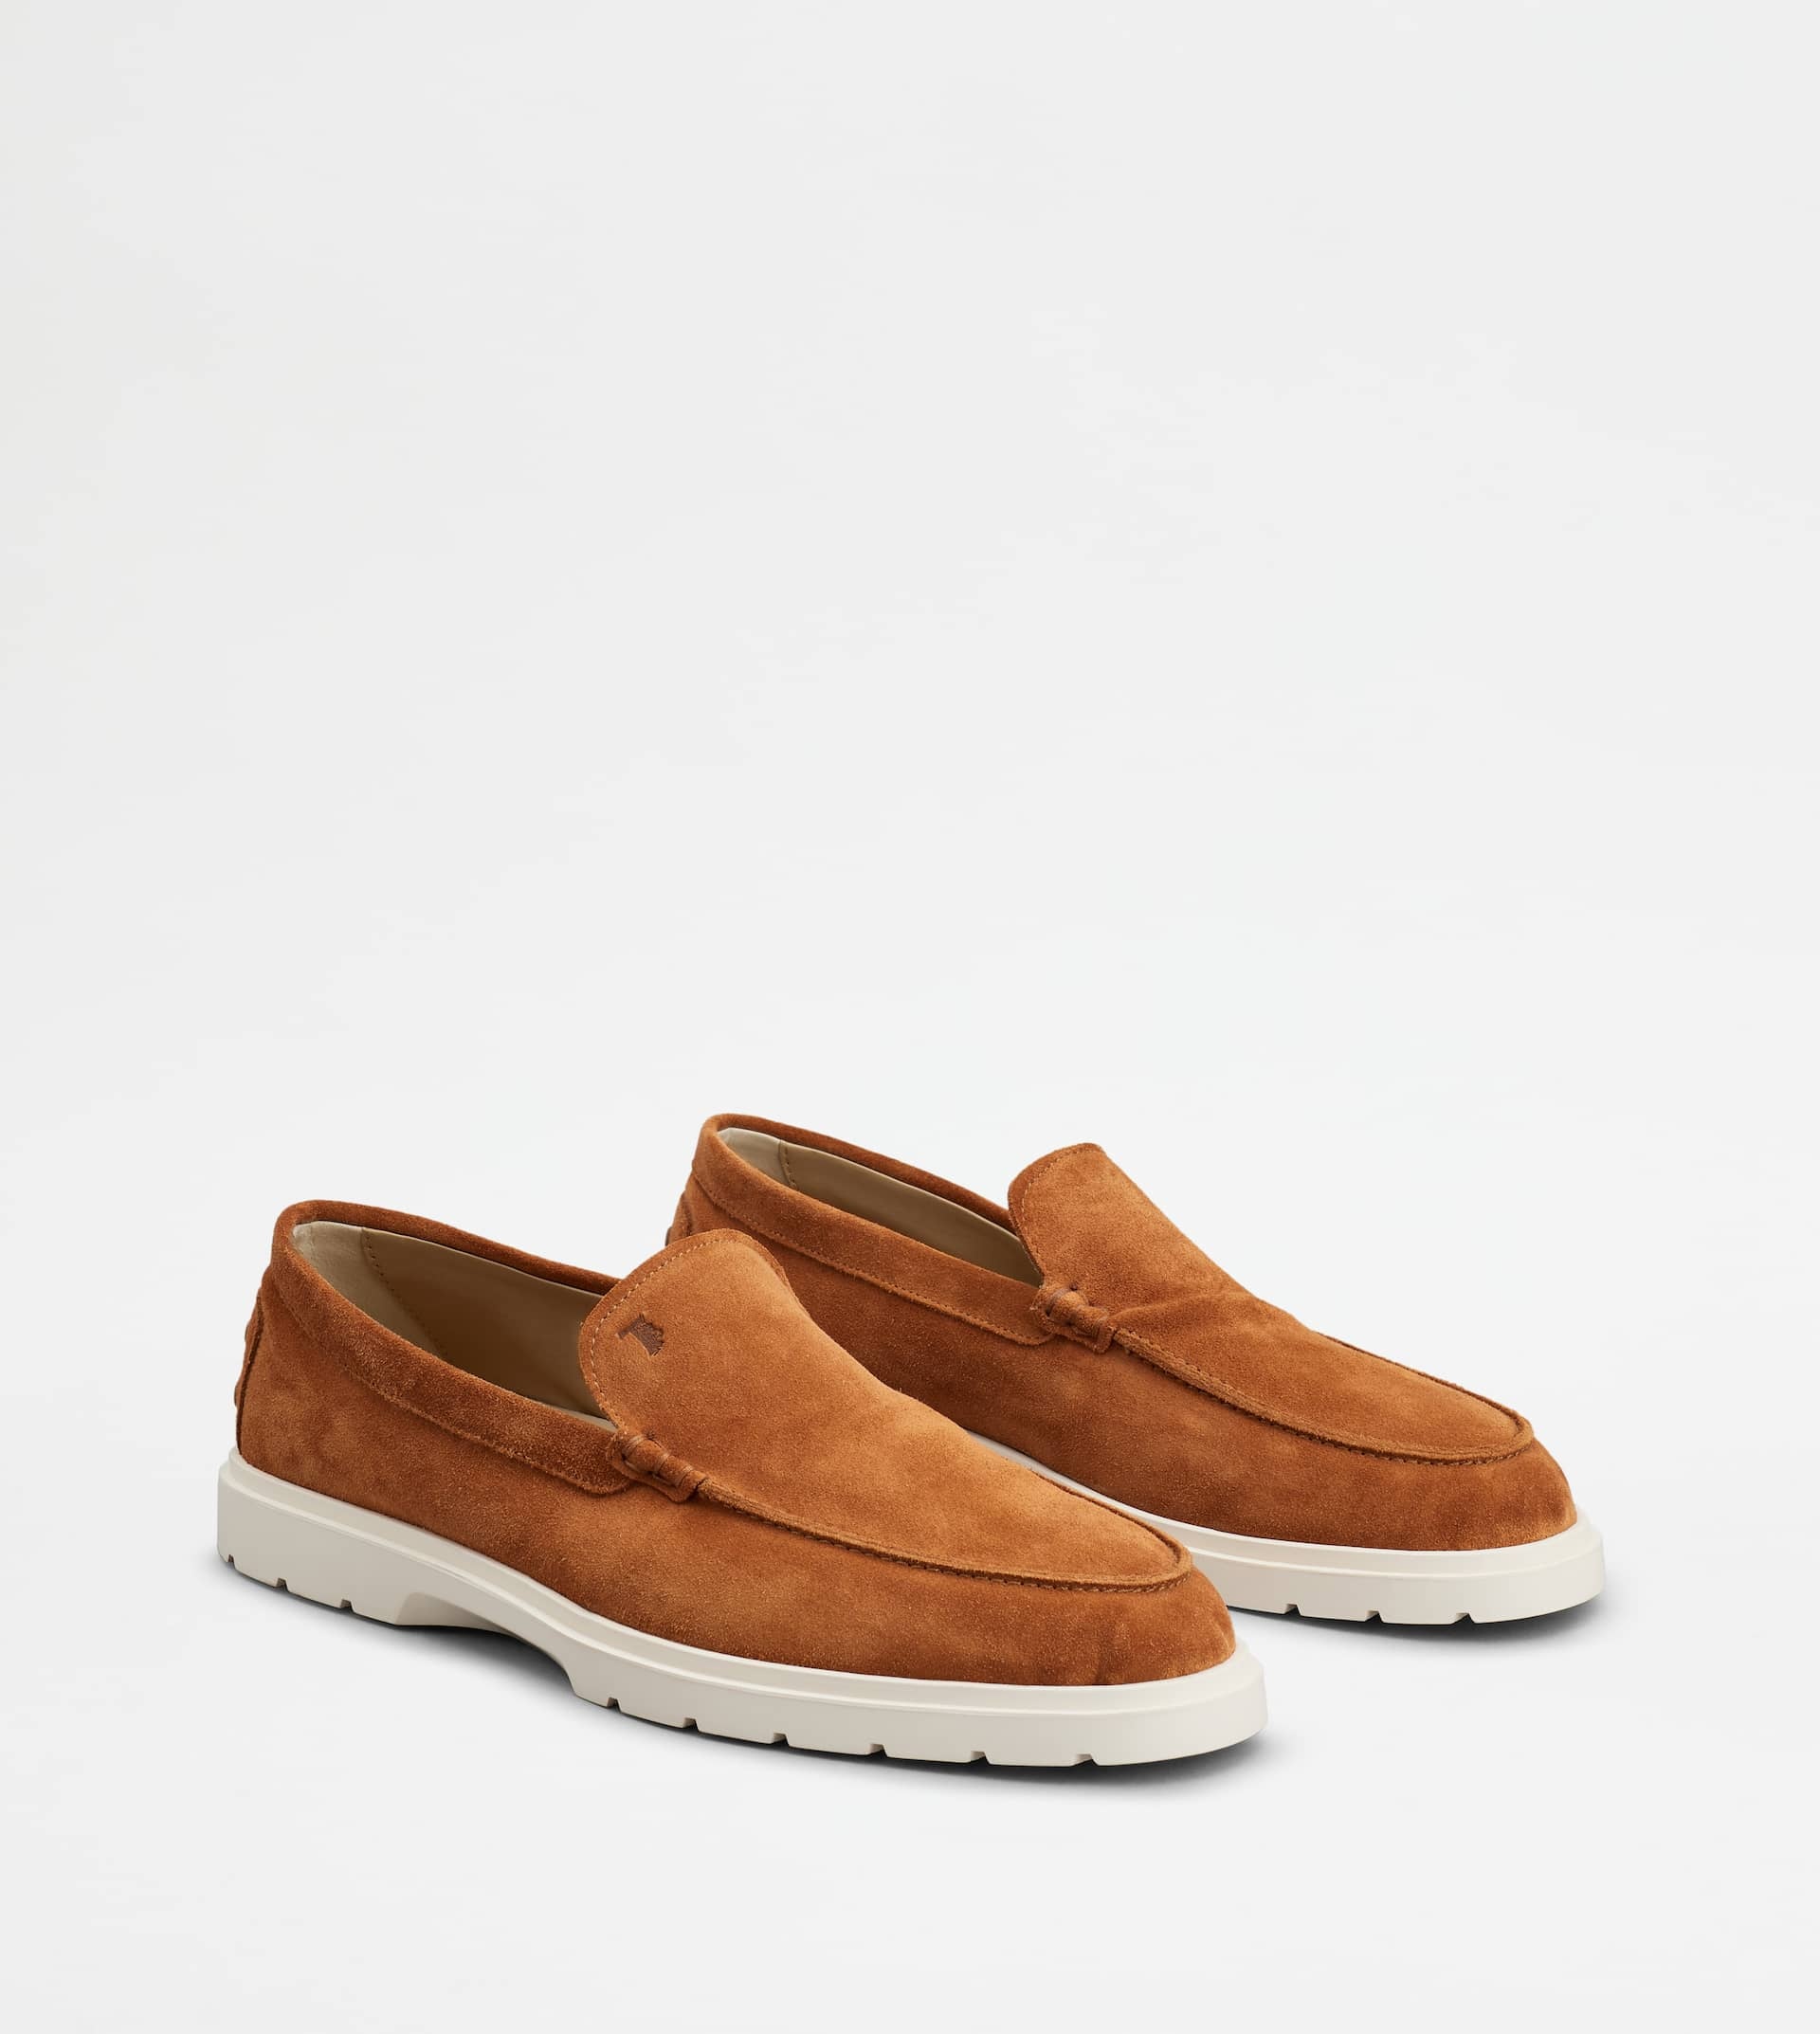 SLIPPER LOAFERS IN SUEDE - BROWN - 3